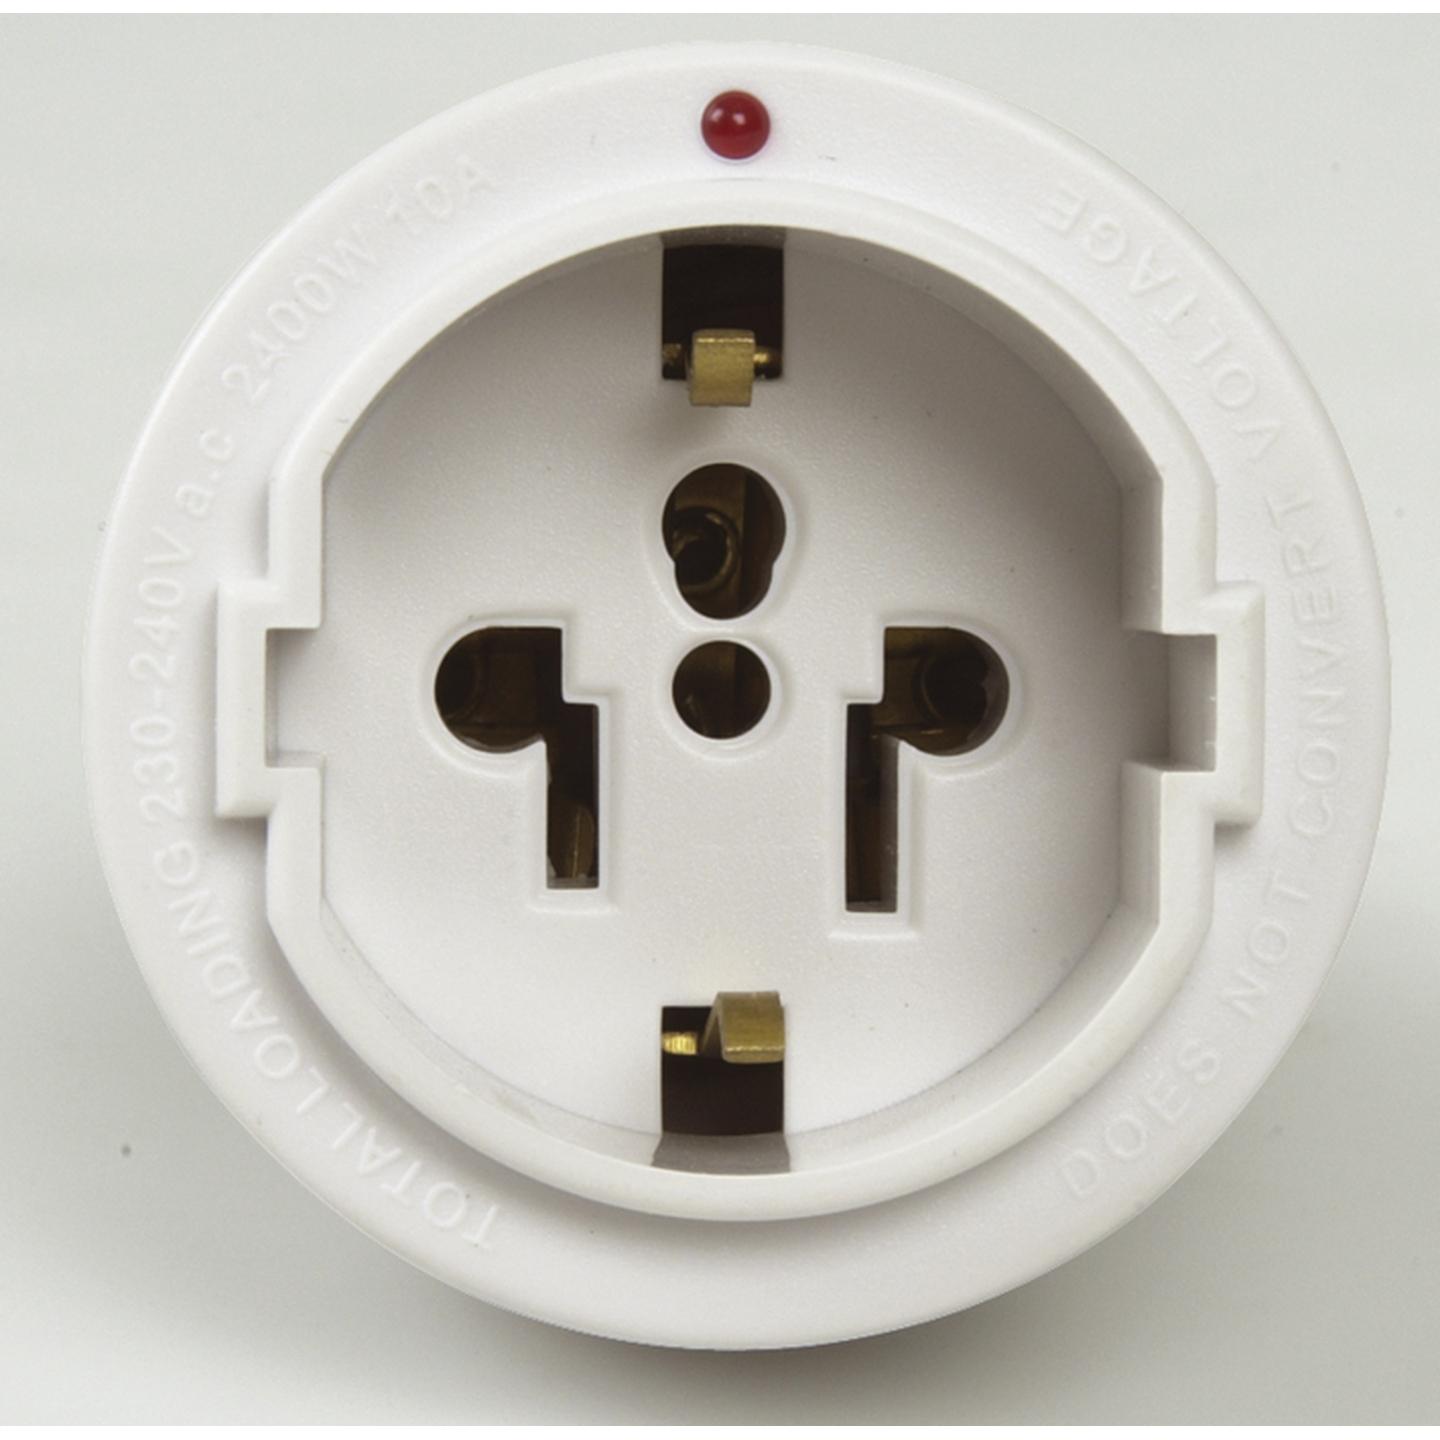 Earthed Adaptor for Australia & NZ with Surge Protection